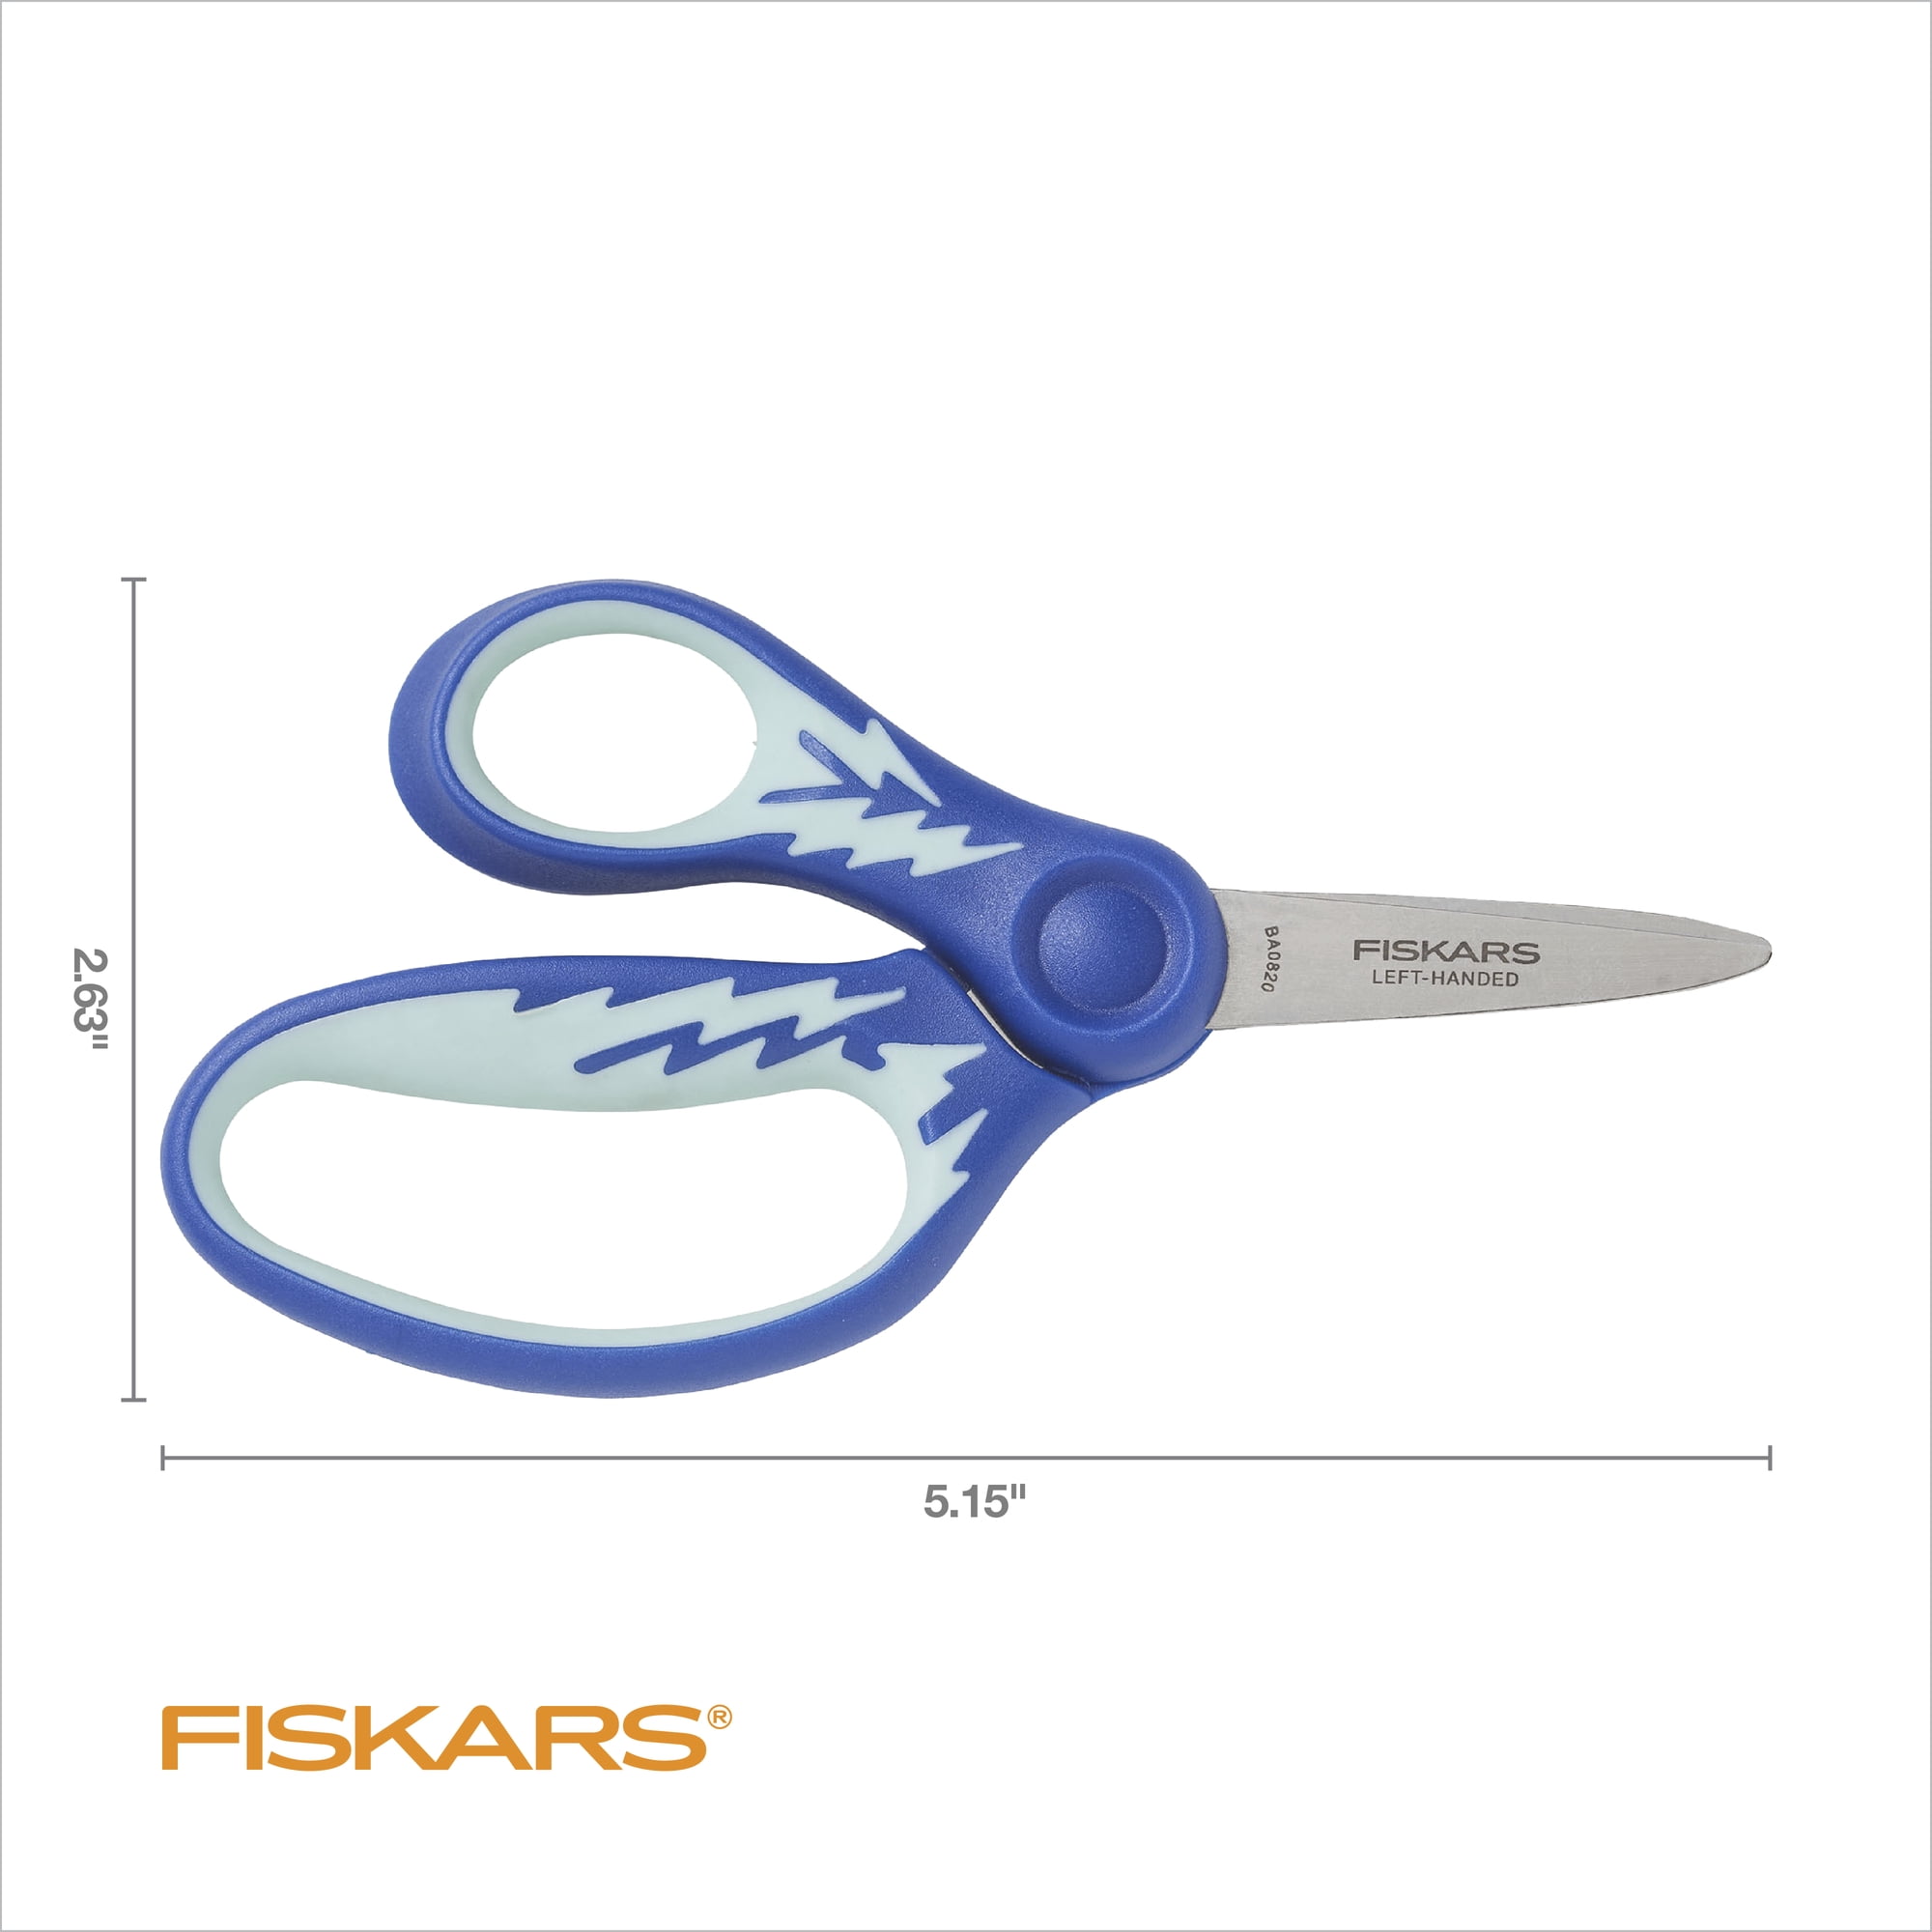 Left-Handed Child's Scissors with Central Pivot - Chooice